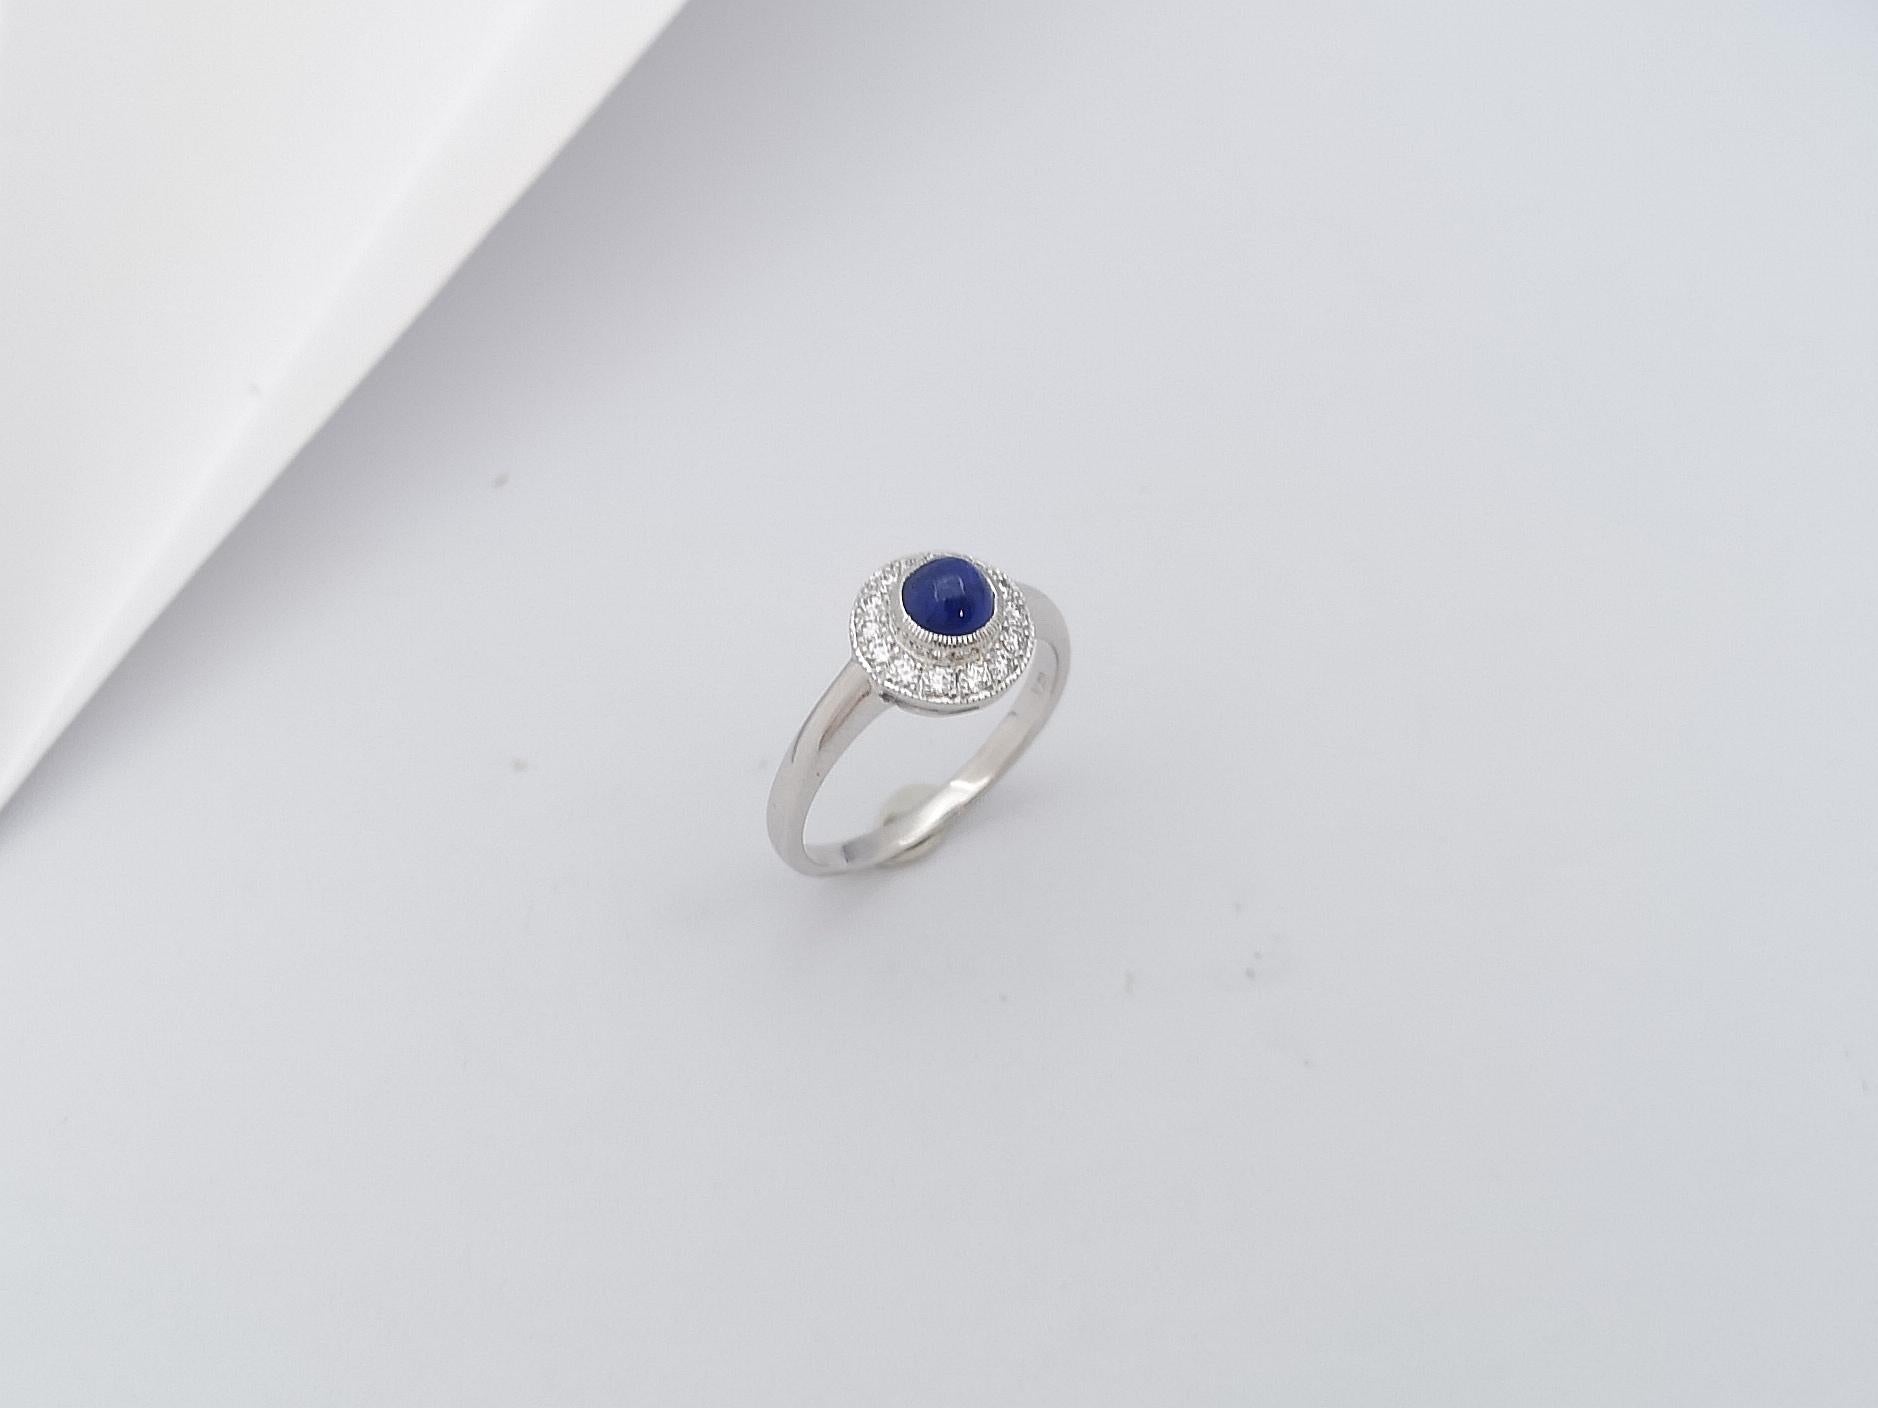 Cabochon Blue Sapphire with Diamond Ring Set in 18 Karat White Gold Settings For Sale 8